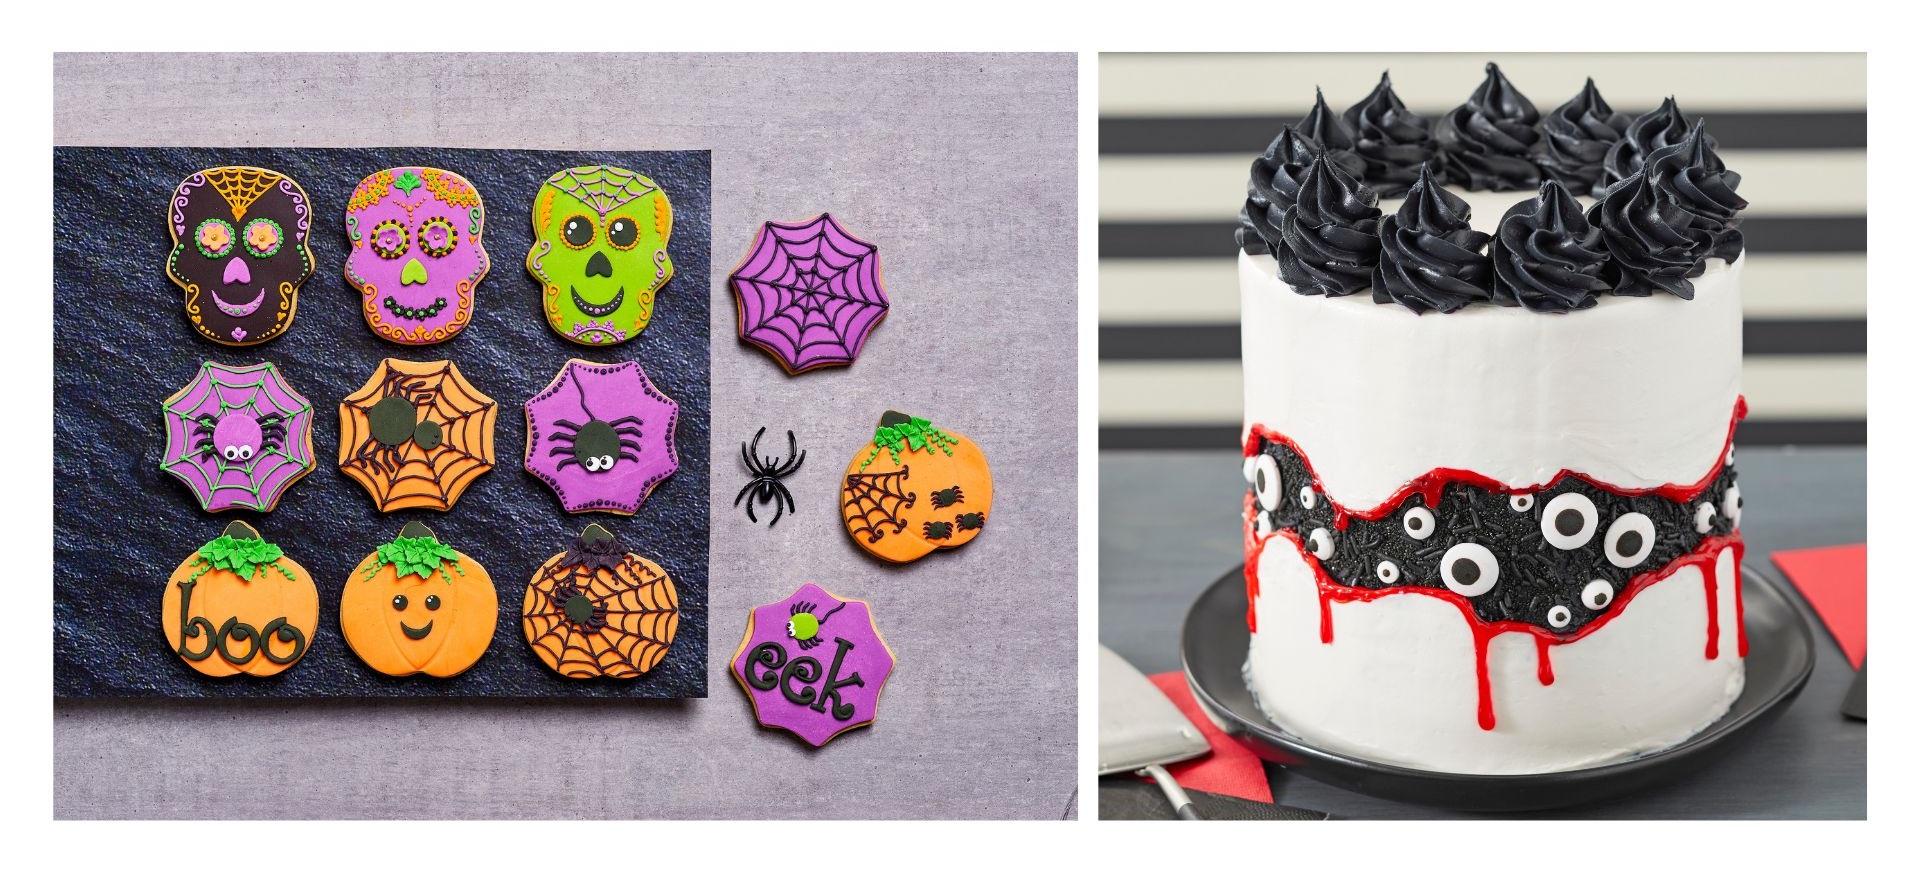 Add a sweet twist to your Halloween with decorated sugar cookies and tier cakes